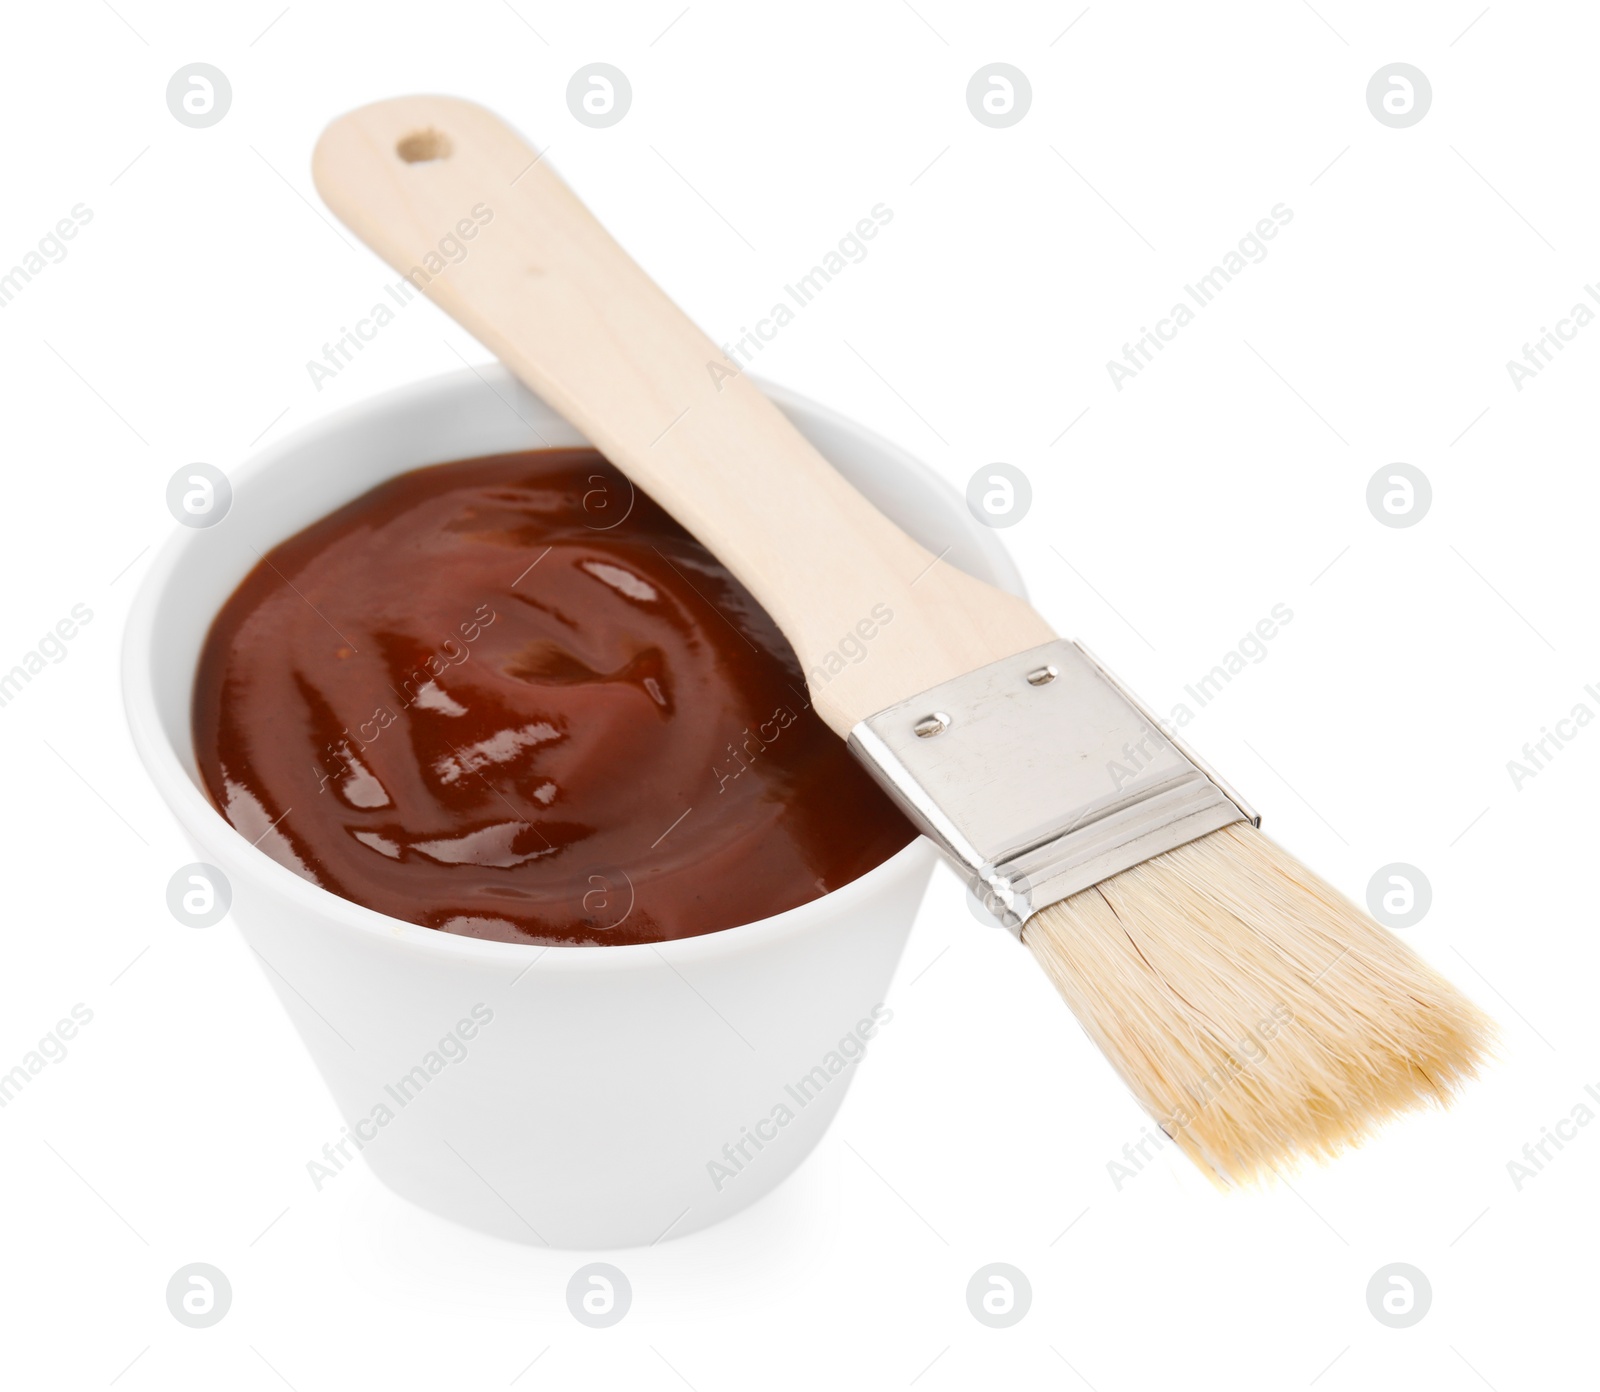 Photo of Marinade in bowl and basting brush isolated on white